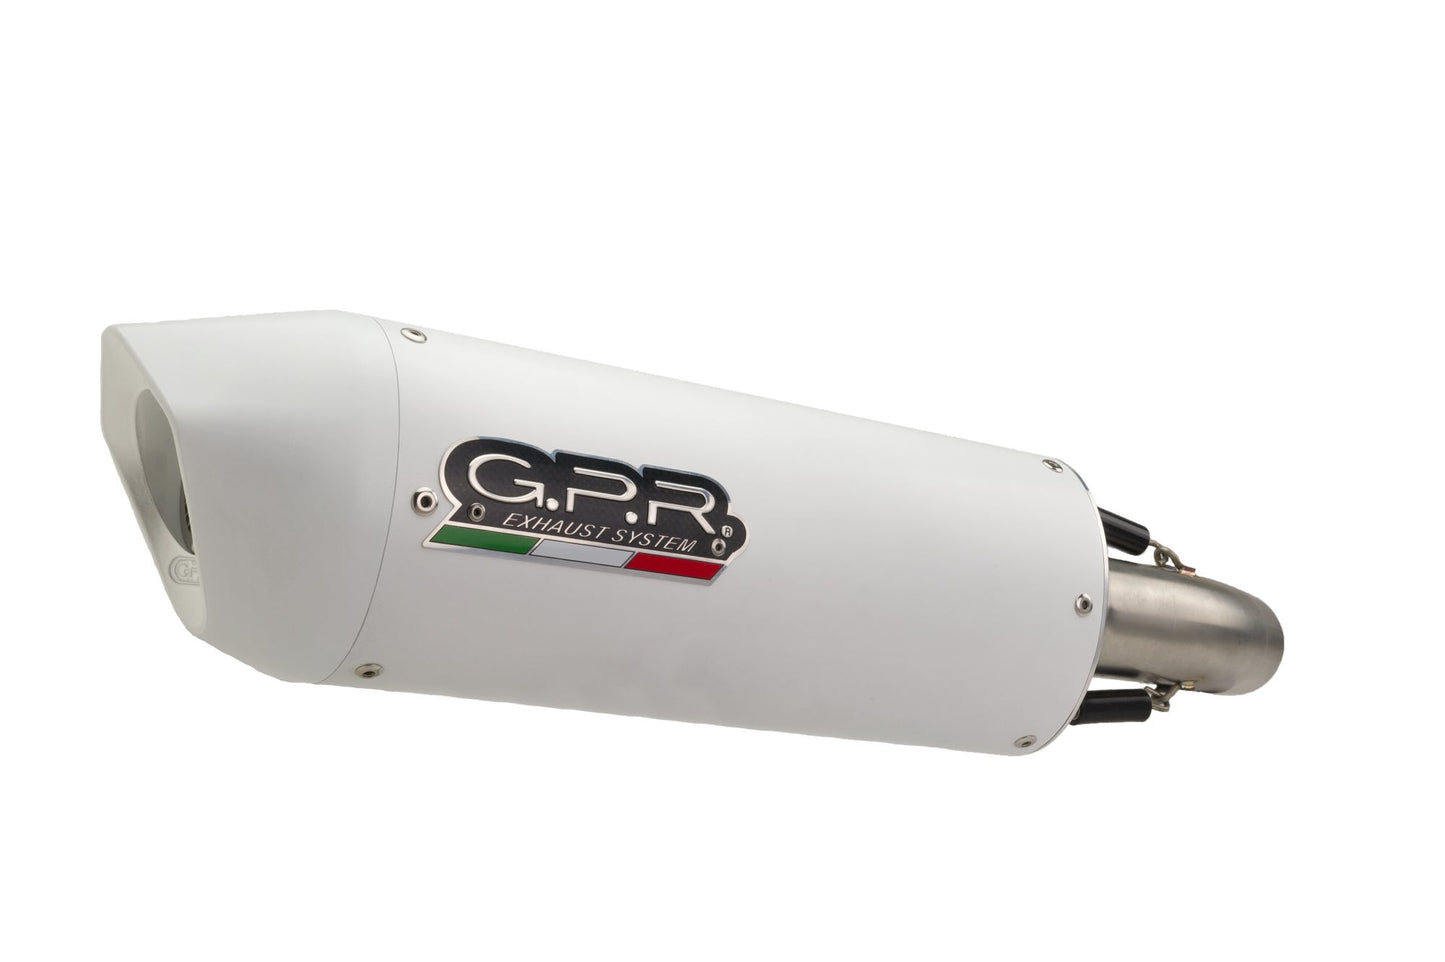 GPR Exhaust System Honda CRF1000L Africa Twin 2015-2017, Albus Ceramic, Slip-on Exhaust Including Removable DB Killer and Link Pipe